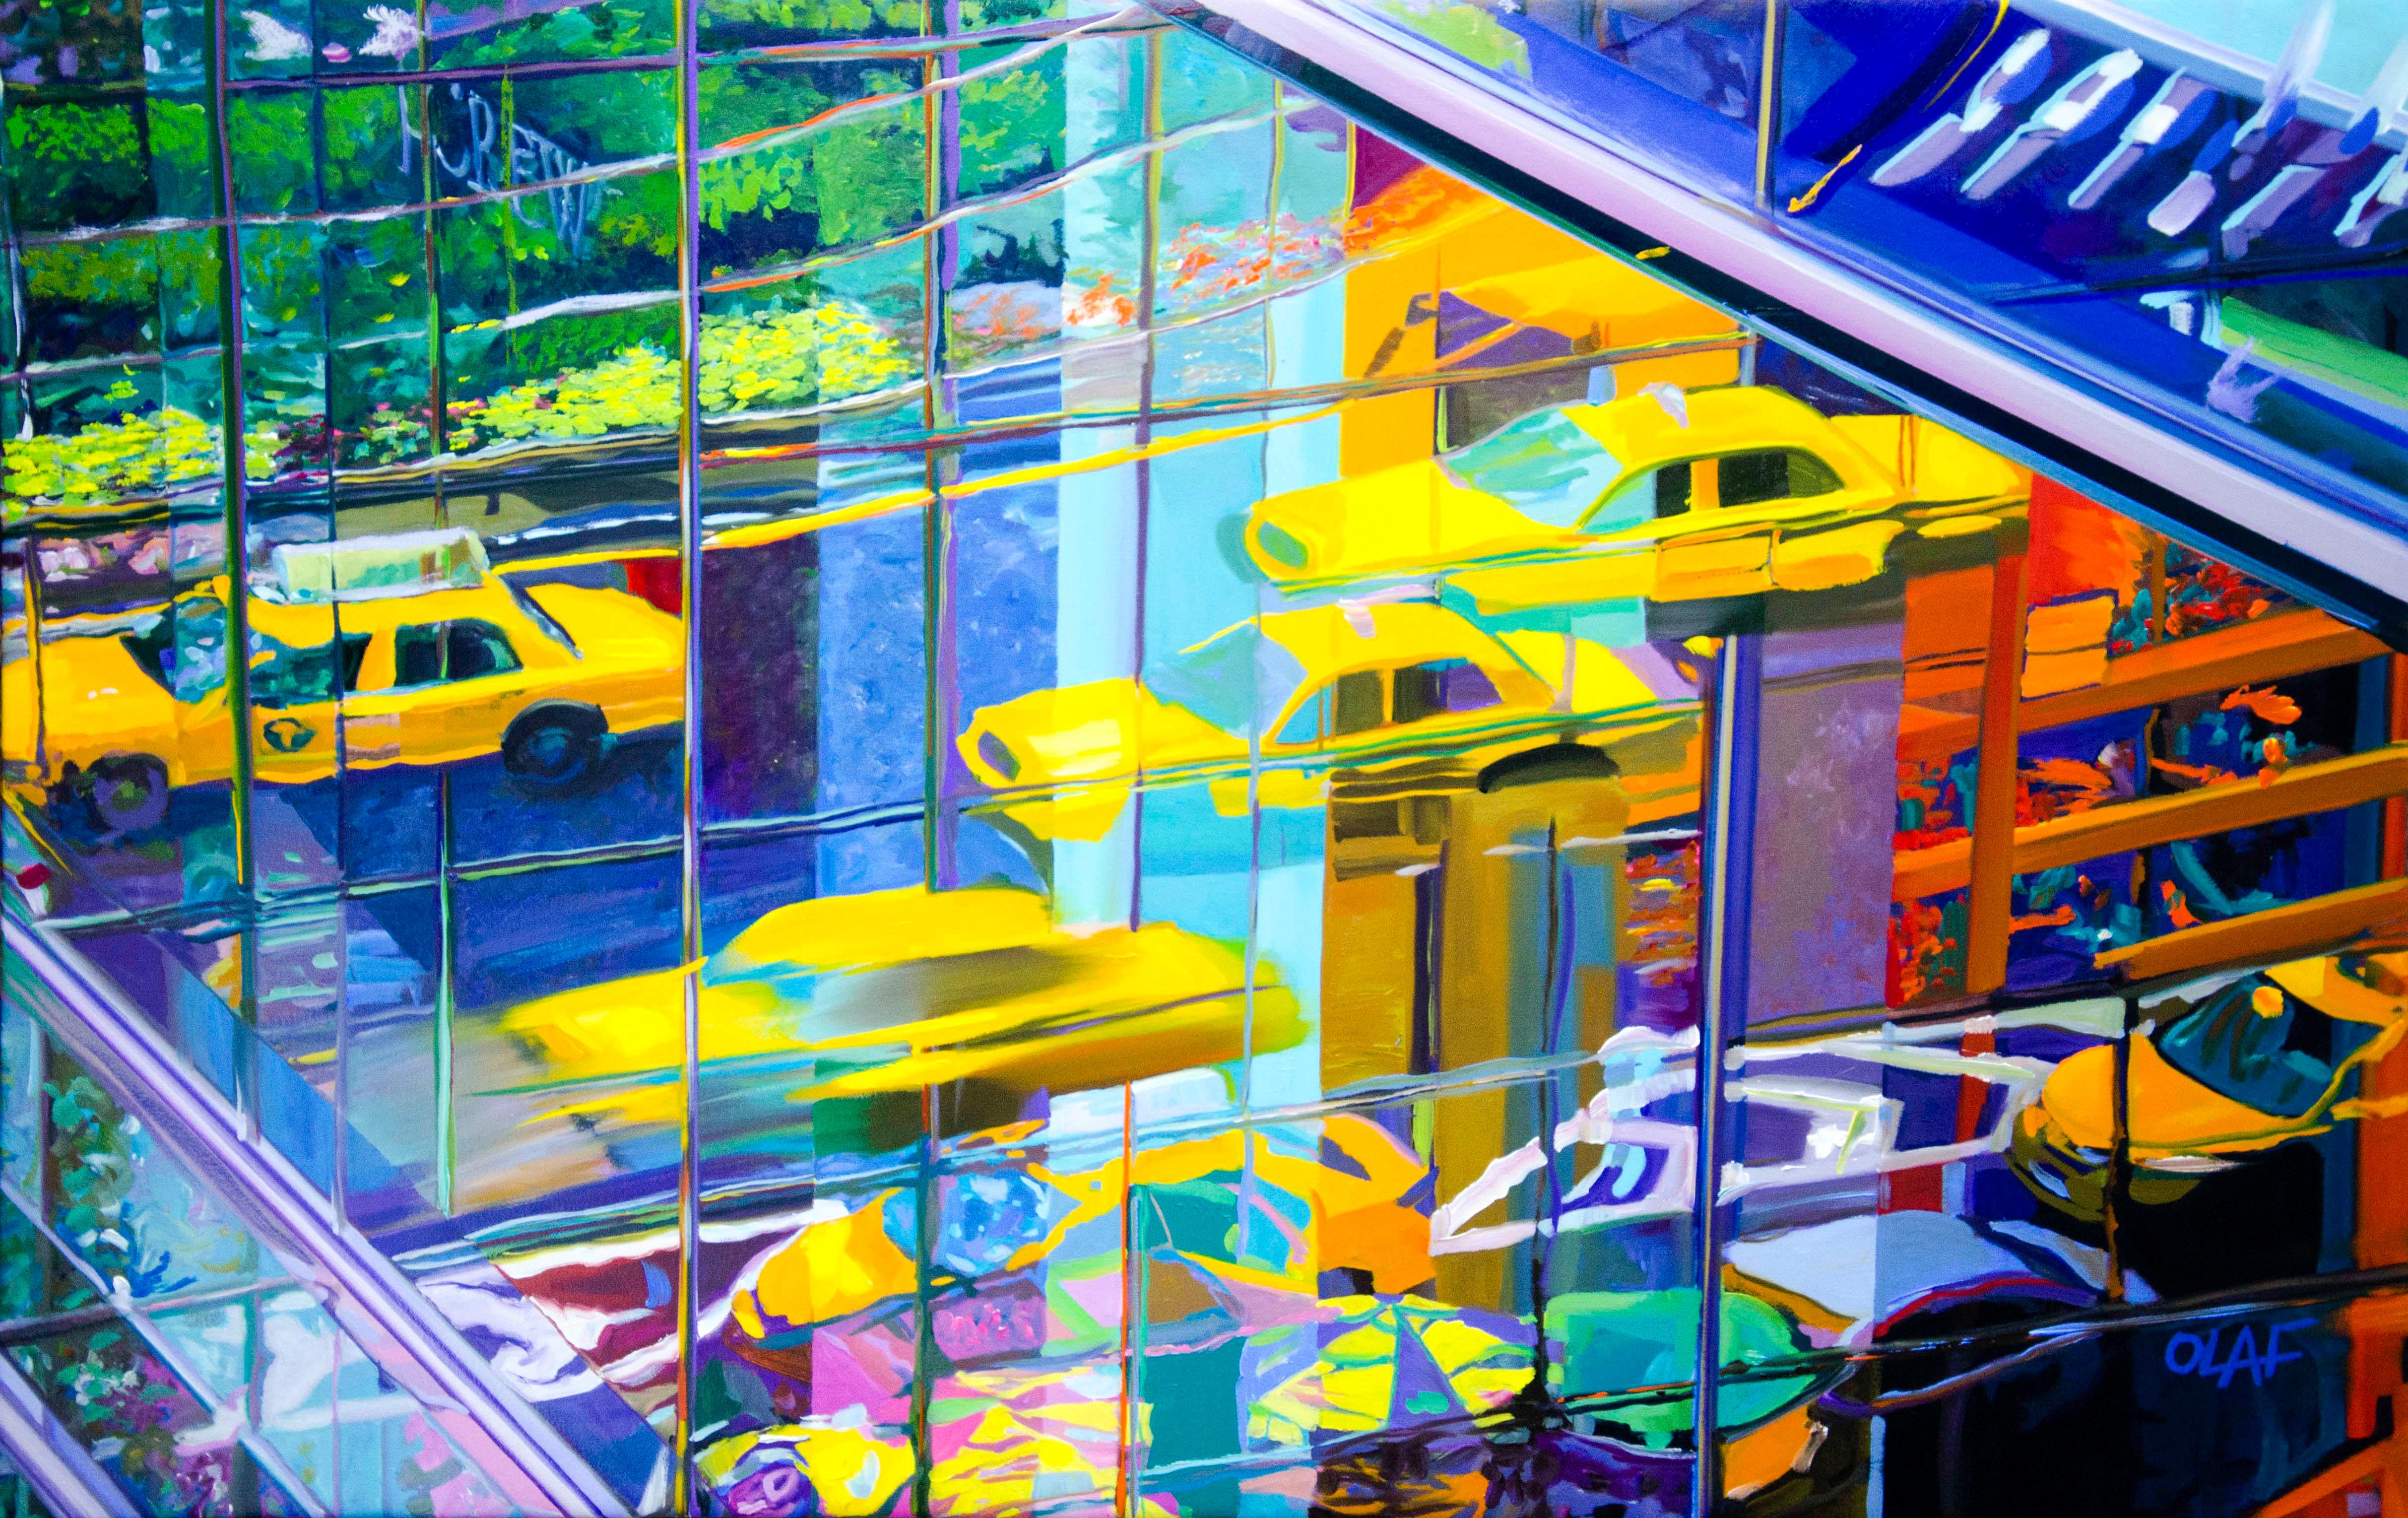 Olaf Schneider, "City Limits", 26x40 Colorful NYC Taxi Cab Oil Painting 